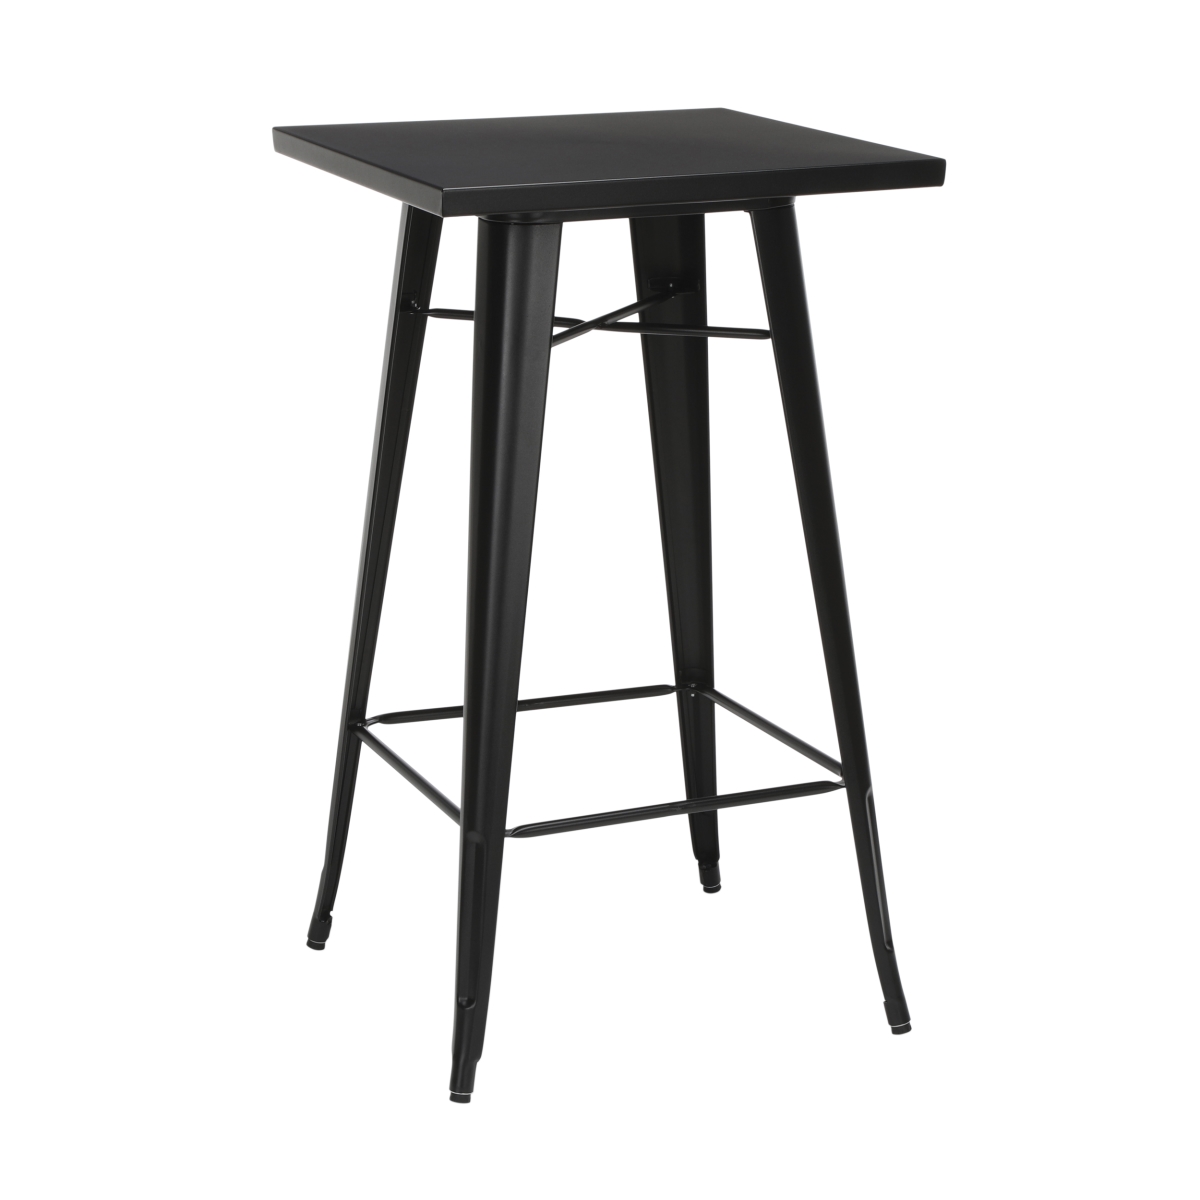 161-bt24-bk 24 In. 161 Collection Industrial Modern Square Bar Table With Footring, Galvanized Steel Indoor & Outdoor Table - Black